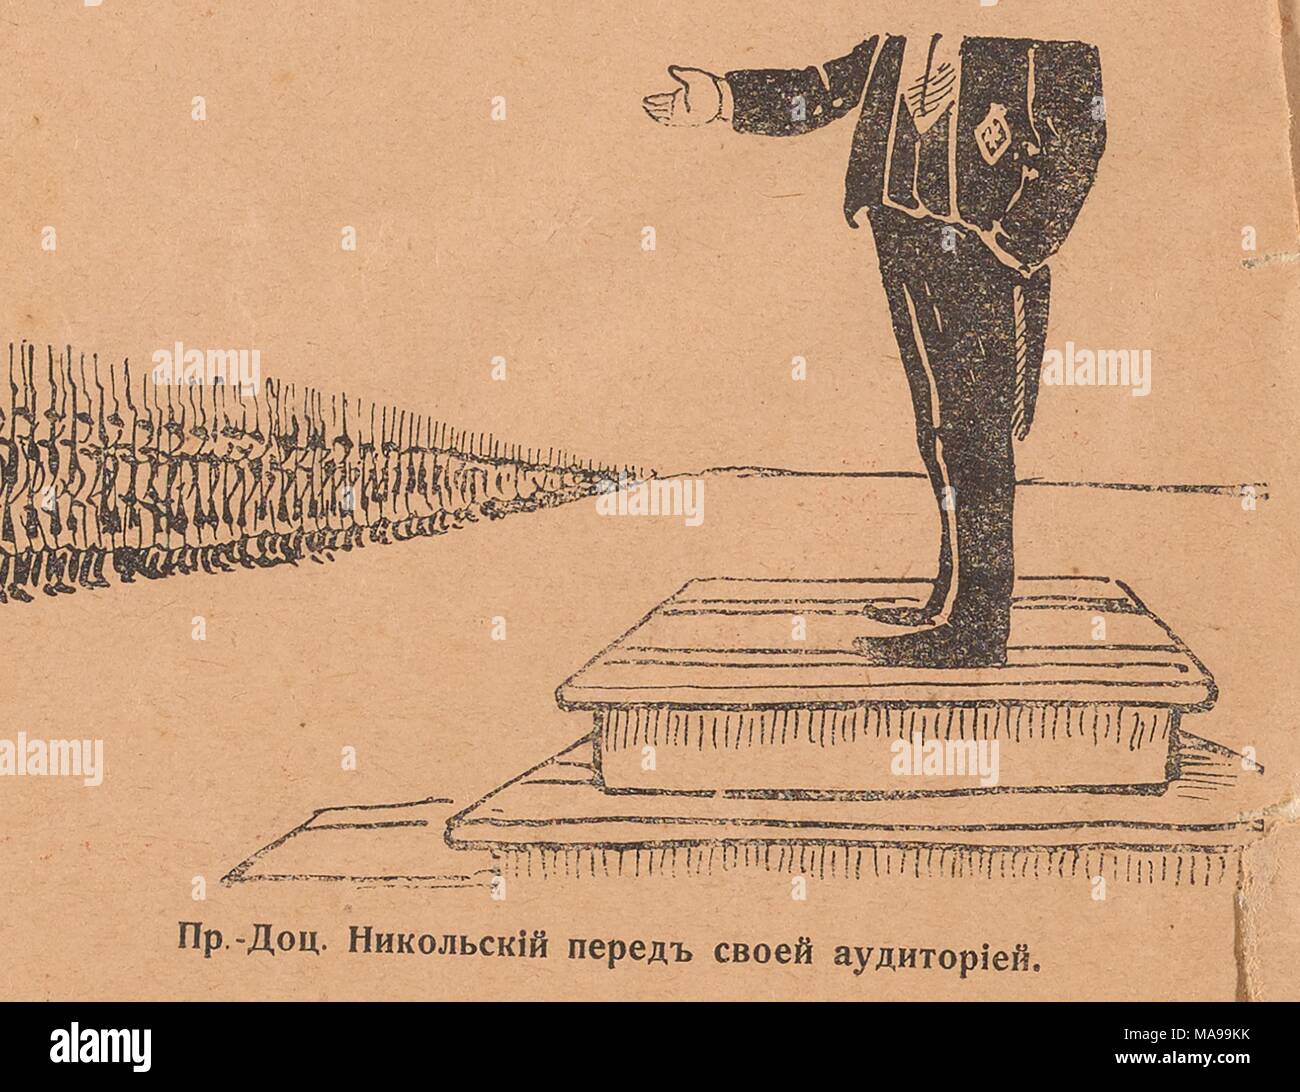 Cartoon from the Russian satirical journal Nagaechka (The Little Whip) depicting Prof Doc Nikolsky speaking in front of the army, 1905. () Stock Photo